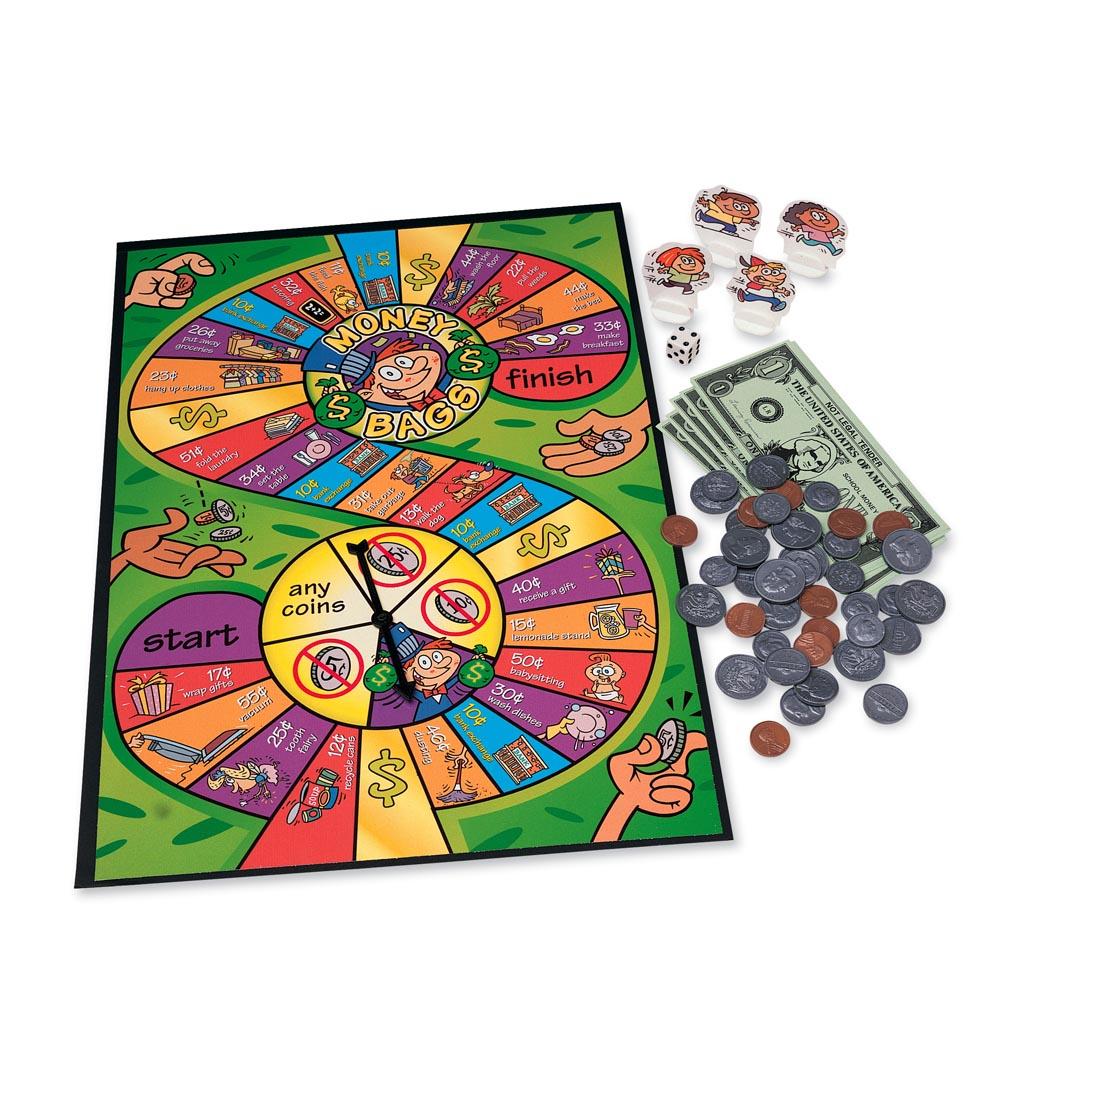 Money Bags Game Board with Spinner, play bills and coins, die and game pieces